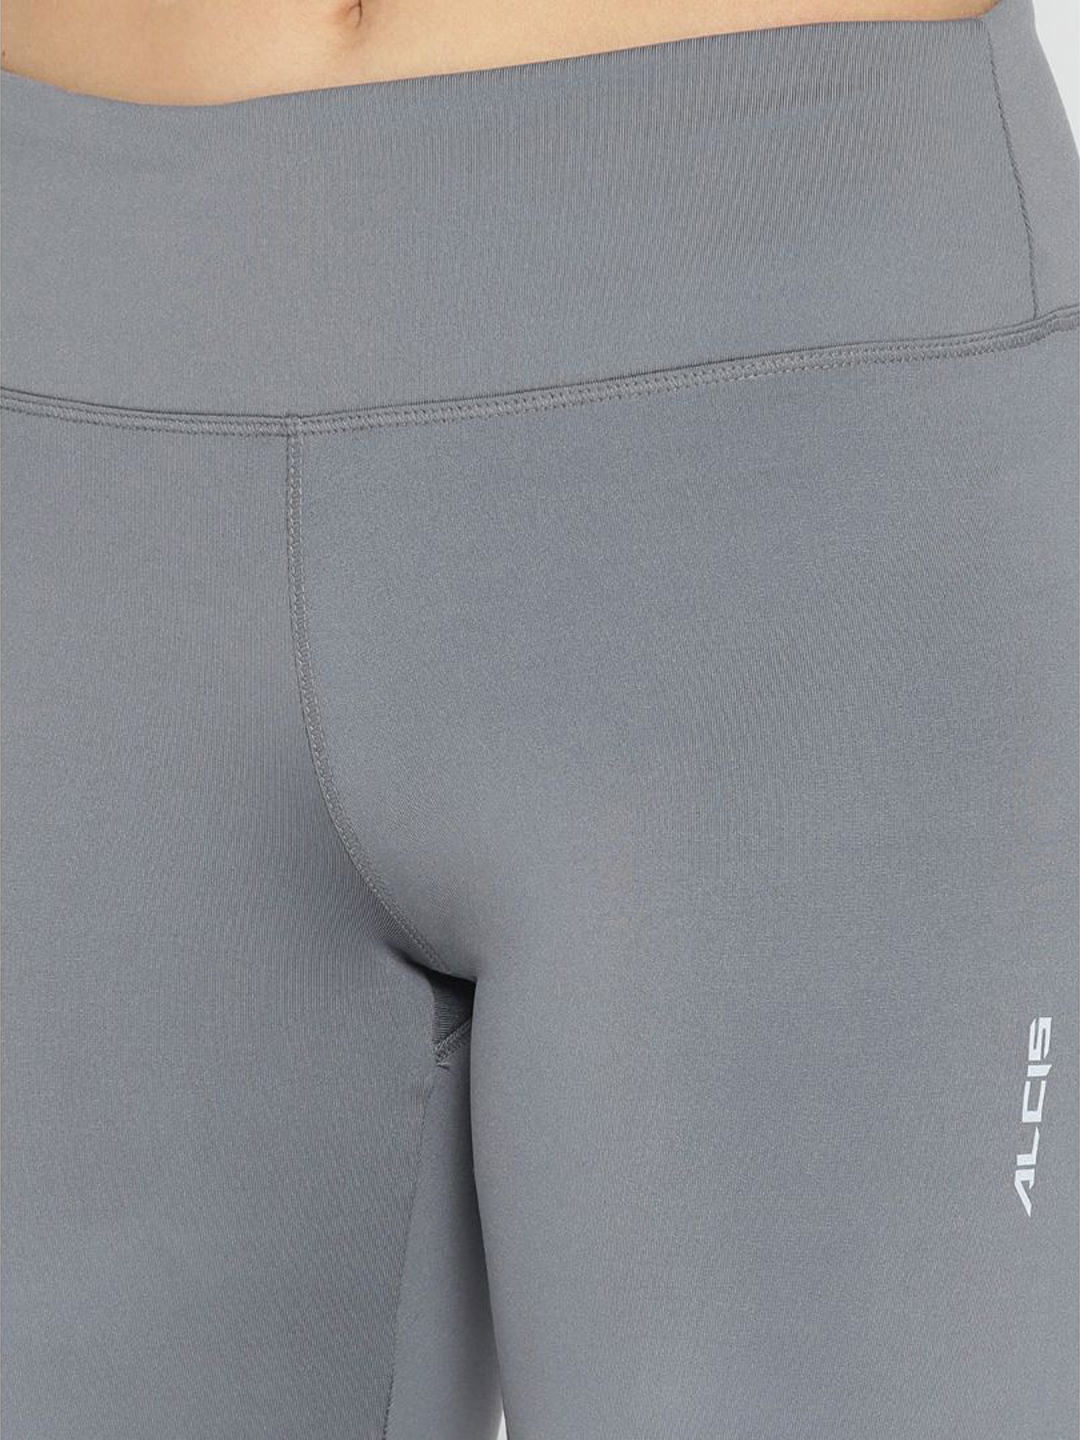 Alcis Women Grey Solid Running Tights with Printed Detail